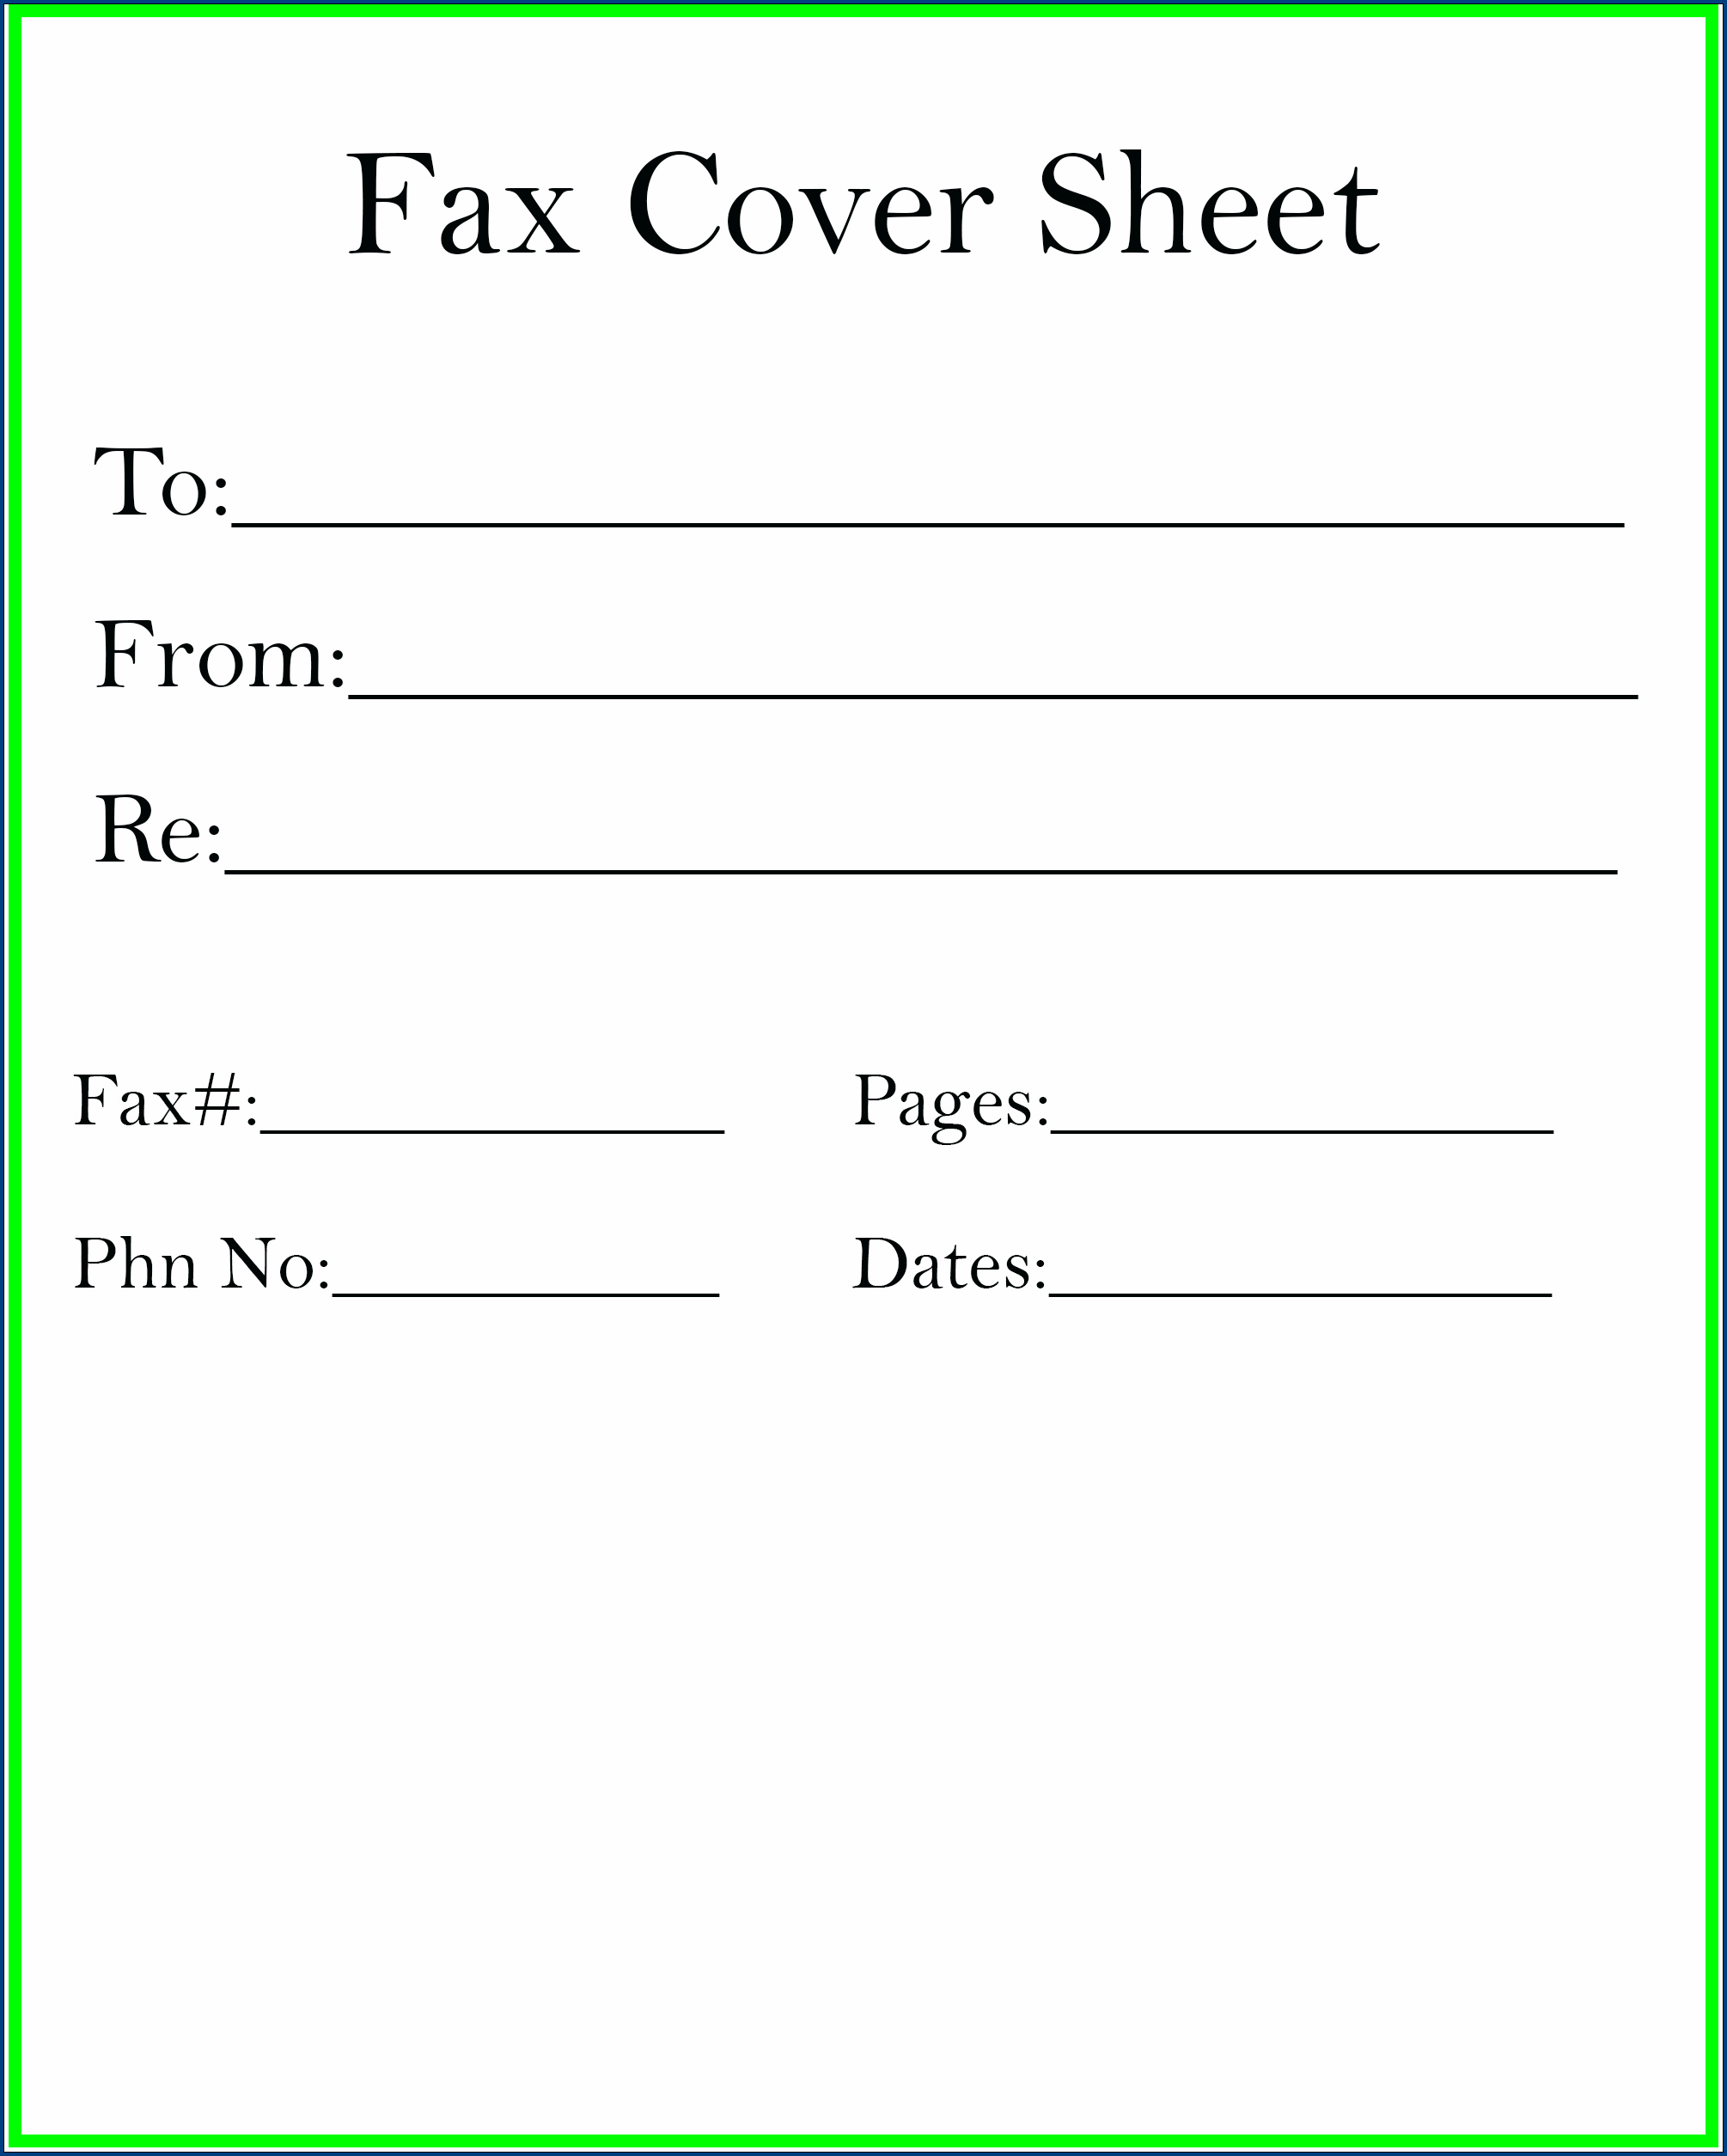 basic-fax-cover-sheet-template-fax-cover-sheet-template